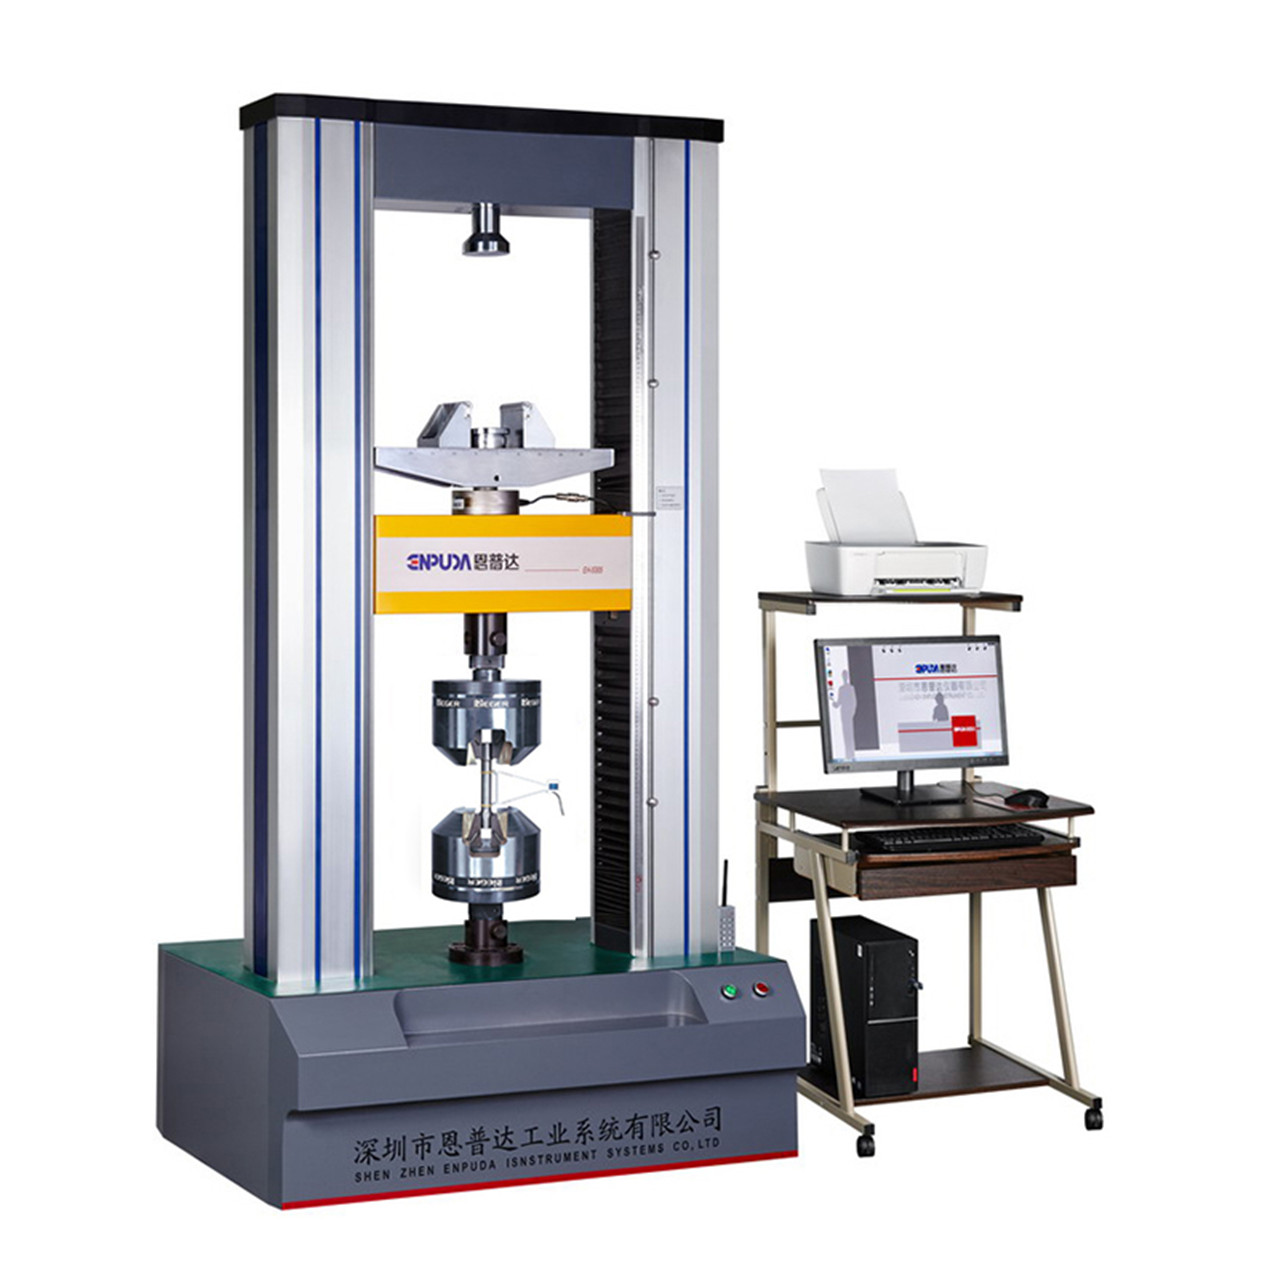 https://www.epd-instrument.com/high-and-low-tempature-electronic-niversal-testing-machine-product/